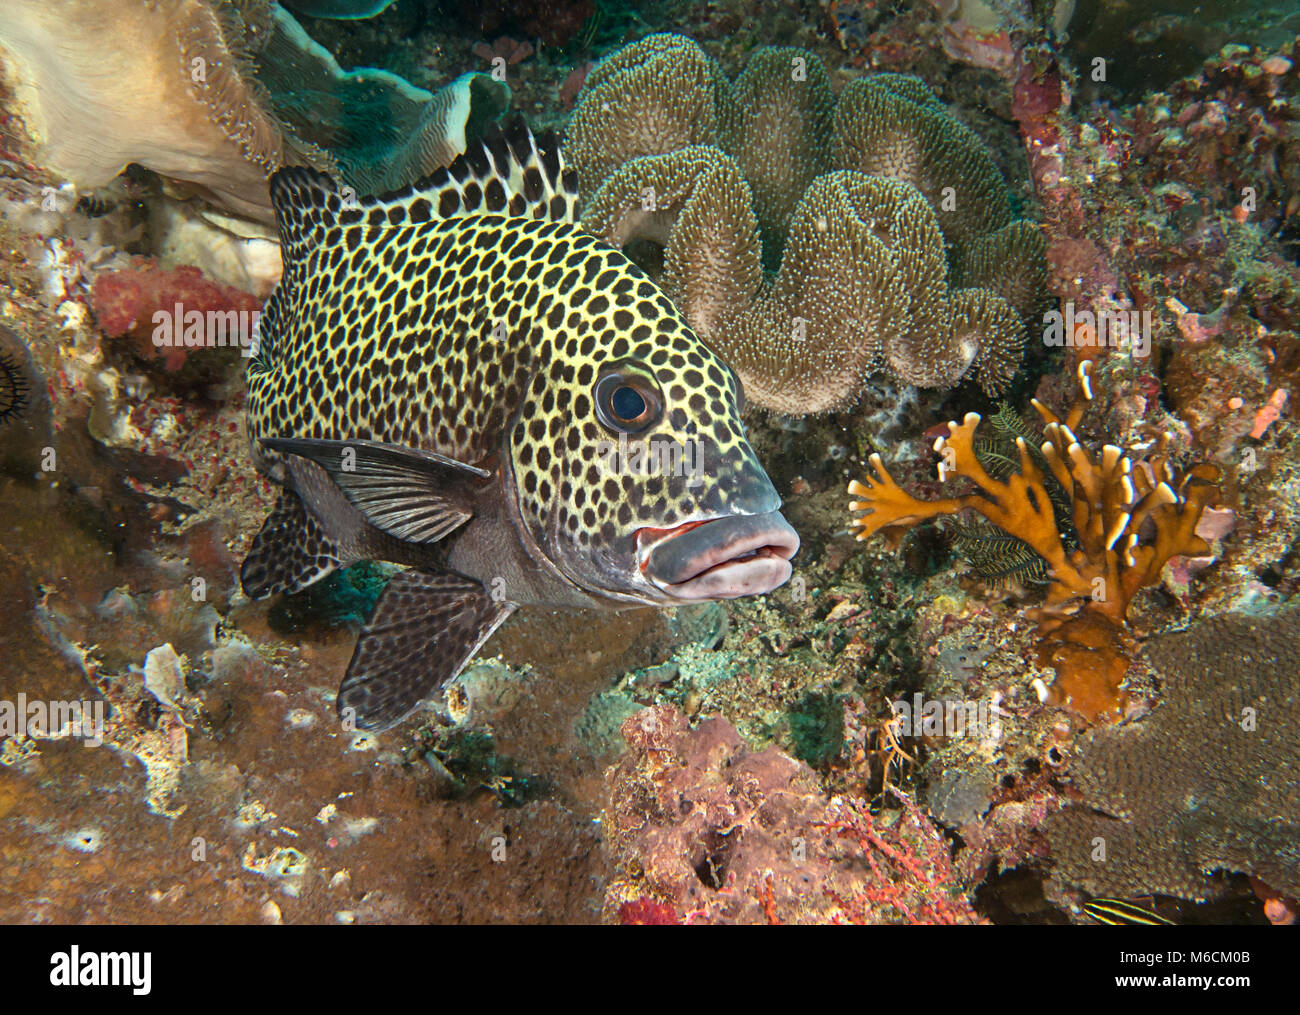 Many spotted sweetlips or harlequin sweetlips ( Plectorhinchus chaetodonoides ) at cleaning station of Bali Stock Photo